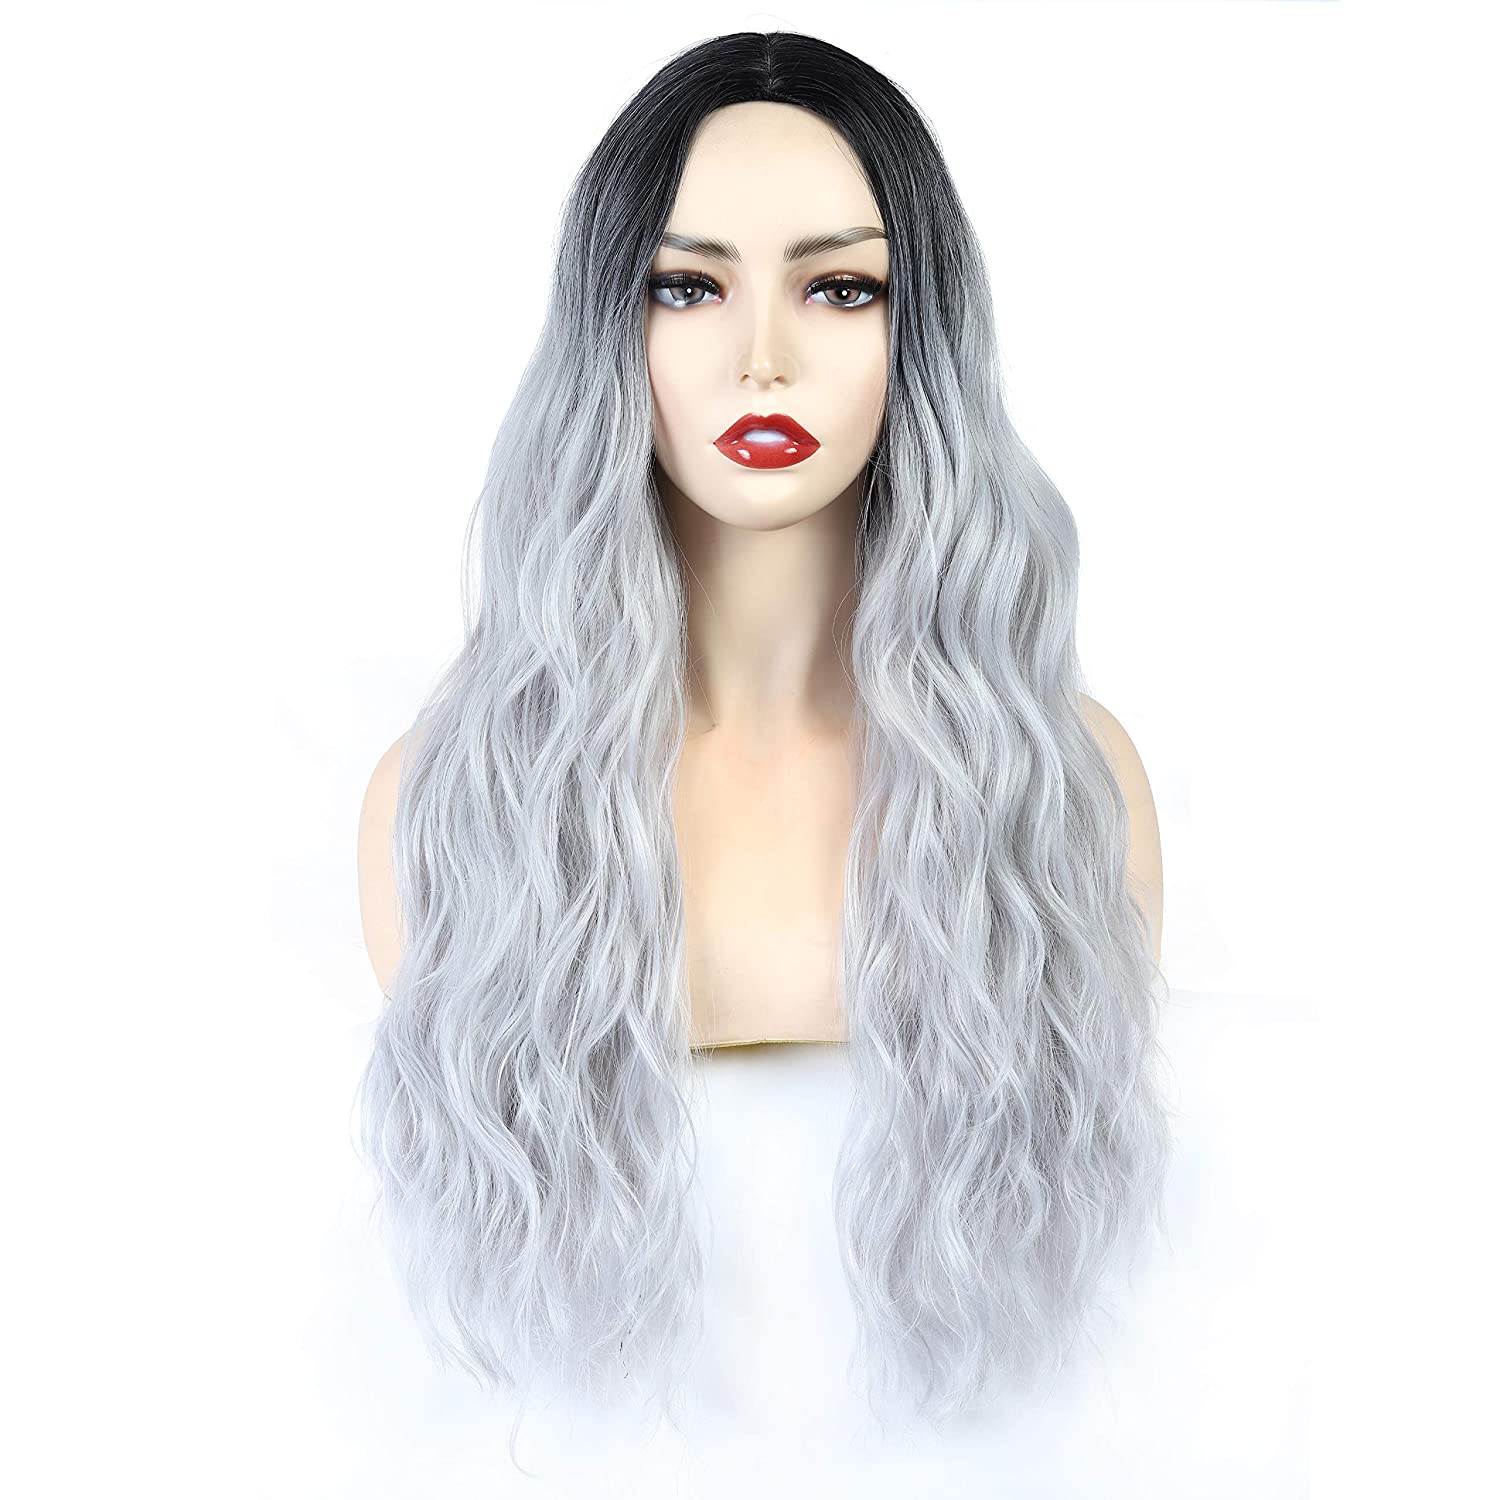 Price:$19.89     VROOSAR Natural Long Curly Wavy Wig Silver Black Ombre Heat Resistant Synthetic Wig For Women Party Cosplay Halloween Costume Wig For Girls-26", Silver Black   Beauty